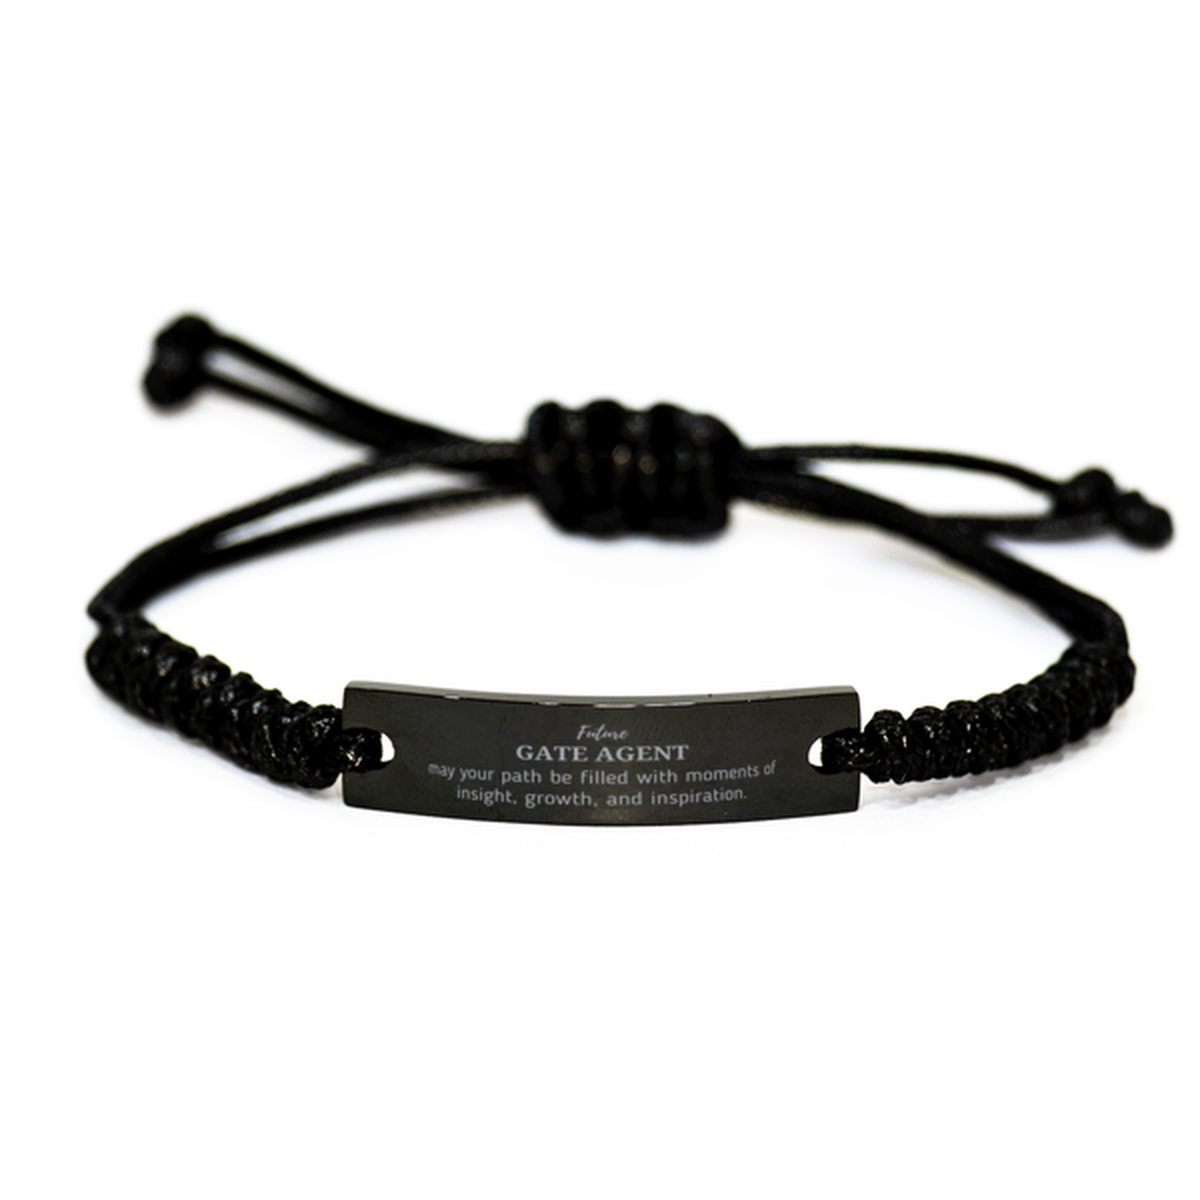 Future Gate Agent Gifts, May your path be filled with moments of insight, Graduation Gifts for New Gate Agent, Christmas Unique Black Rope Bracelet For Men, Women, Friends